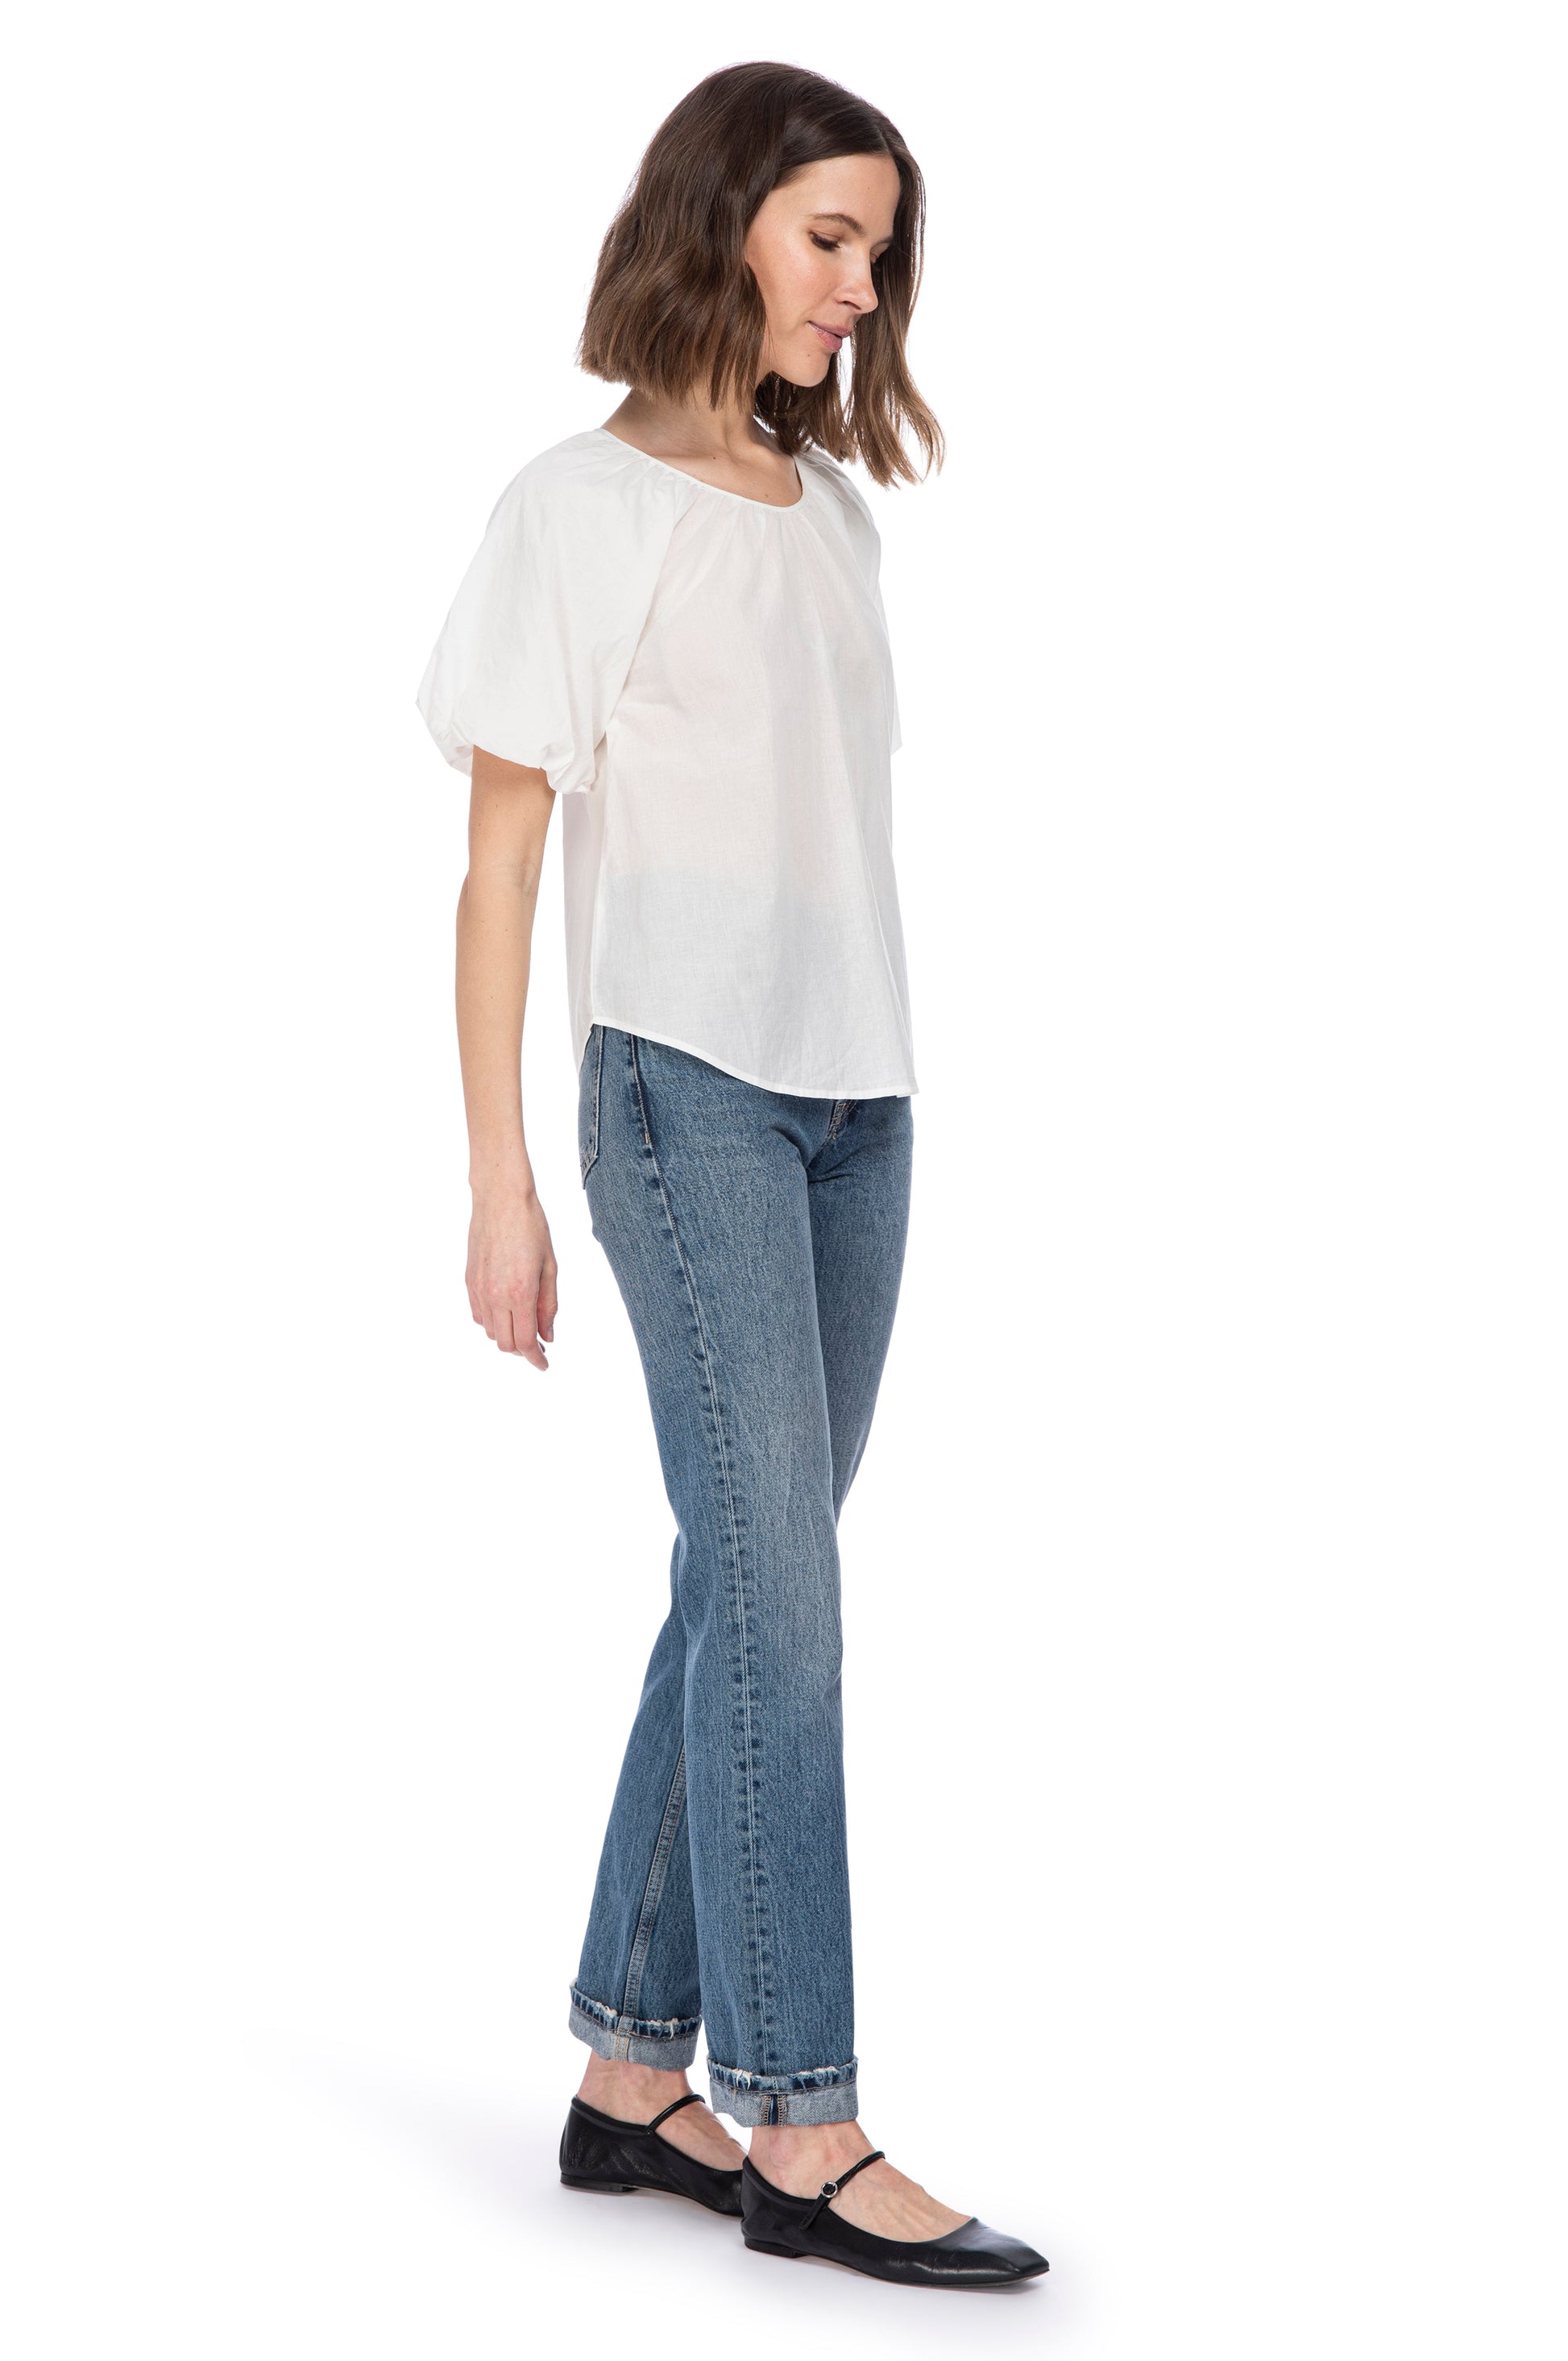 A woman in casual style wearing a white, 100% cotton B Collection by Bobeau Bubble Sleeve top, blue jeans, and black flats, posing with her head turned to one side.